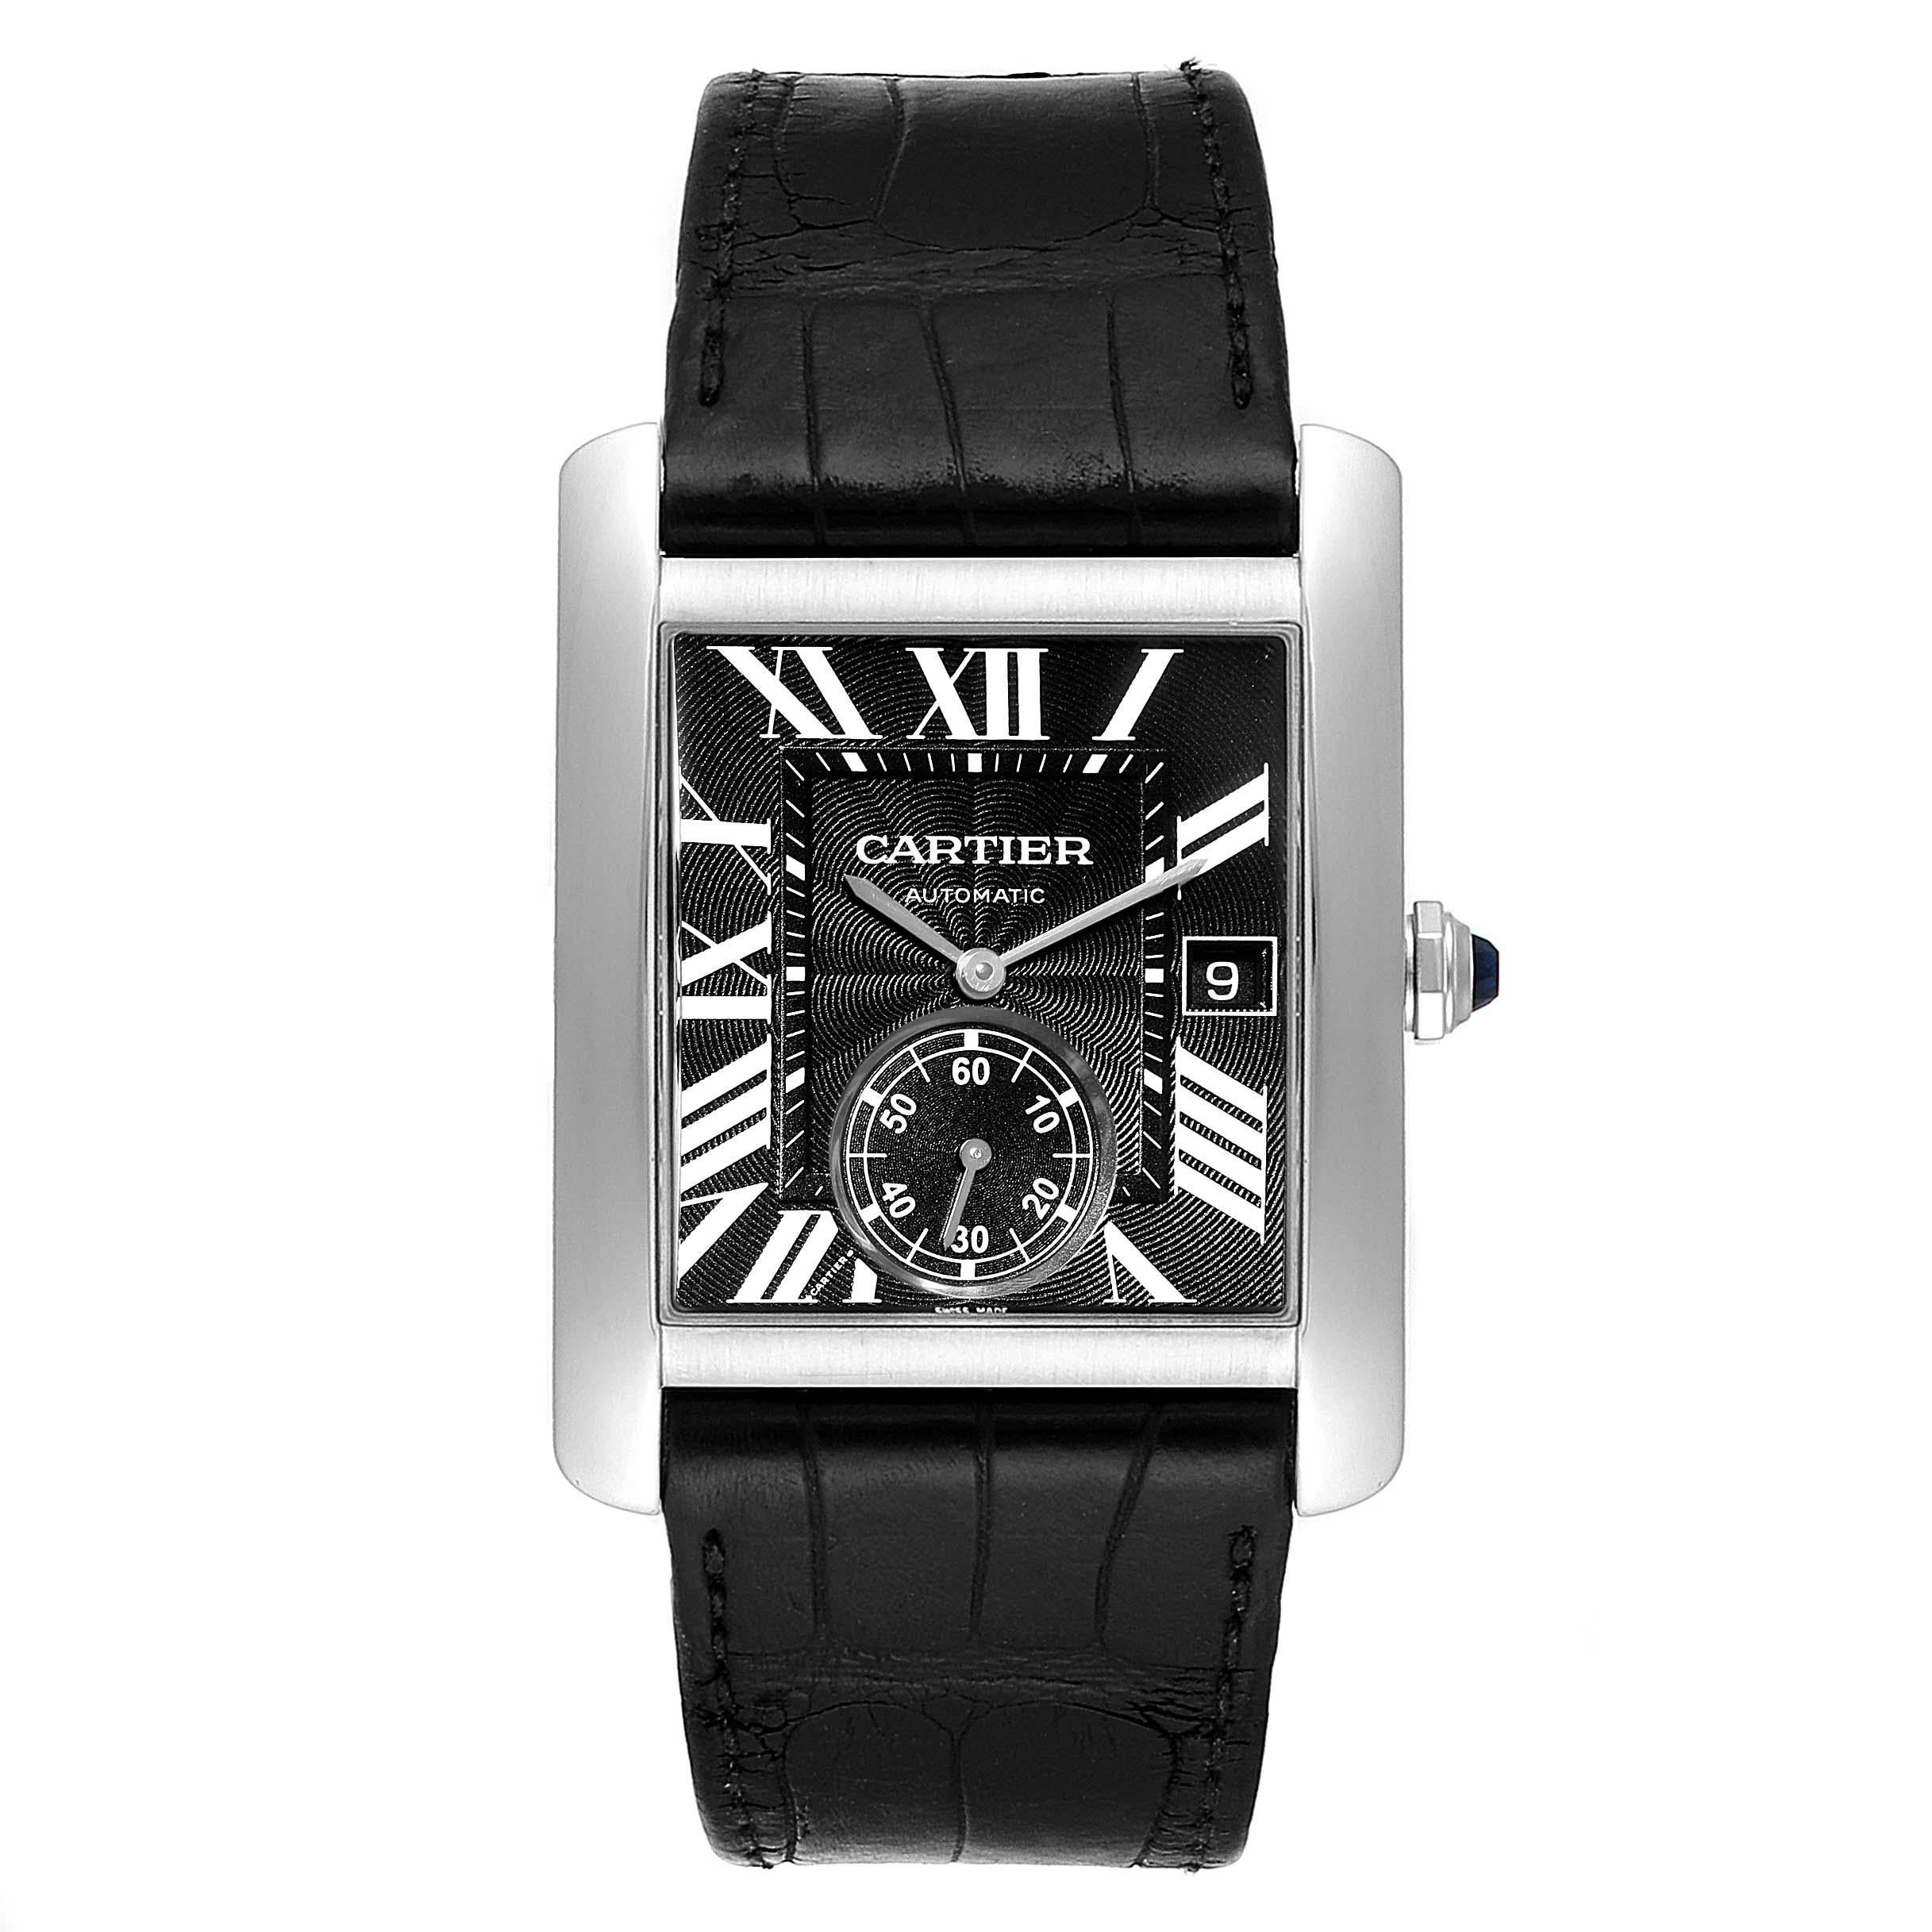 Cartier Tank MC Black Dial Automatic Mens Watch W5330004 Box Papers. Automatic self-winding movement caliber 1904-PS. Brushed stainless steel case 34.3 x 44.0 mm. Protected octagonal crown set with the faceted blue spinel. Exhibition case back.